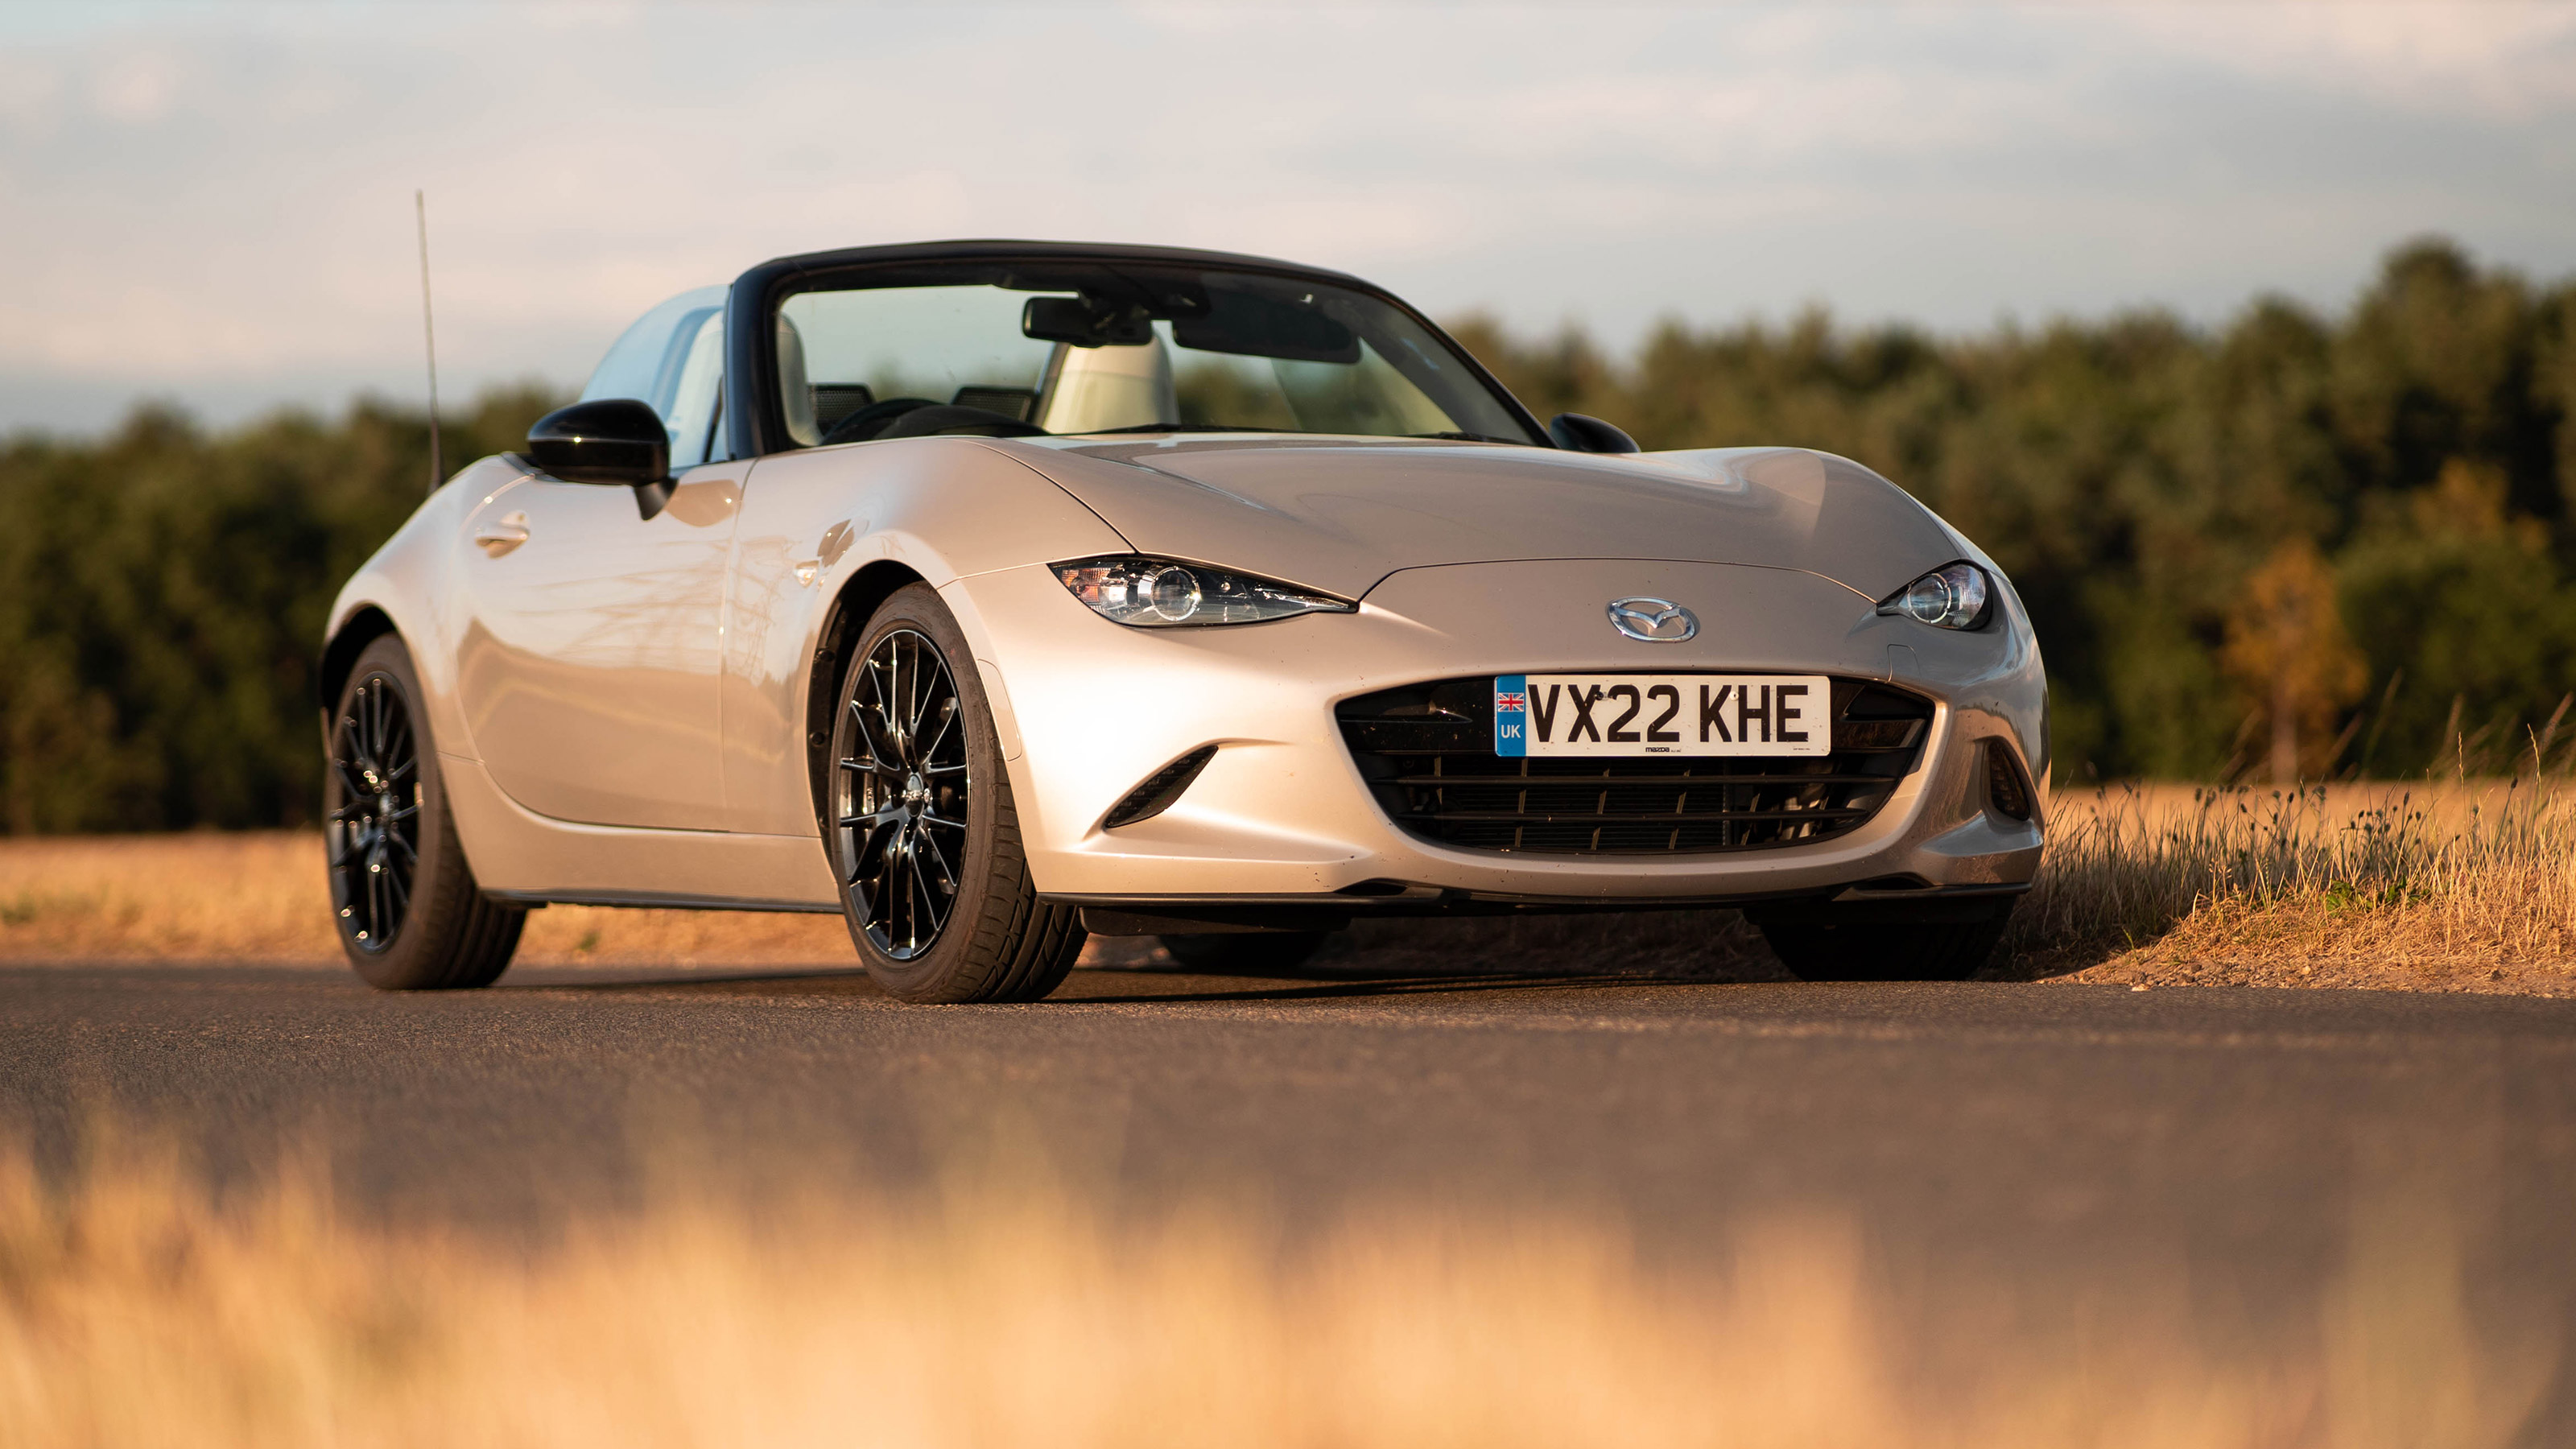 Used Mazda MX-5 (Mk4, ND, 2015 to date) review and buyer's guide